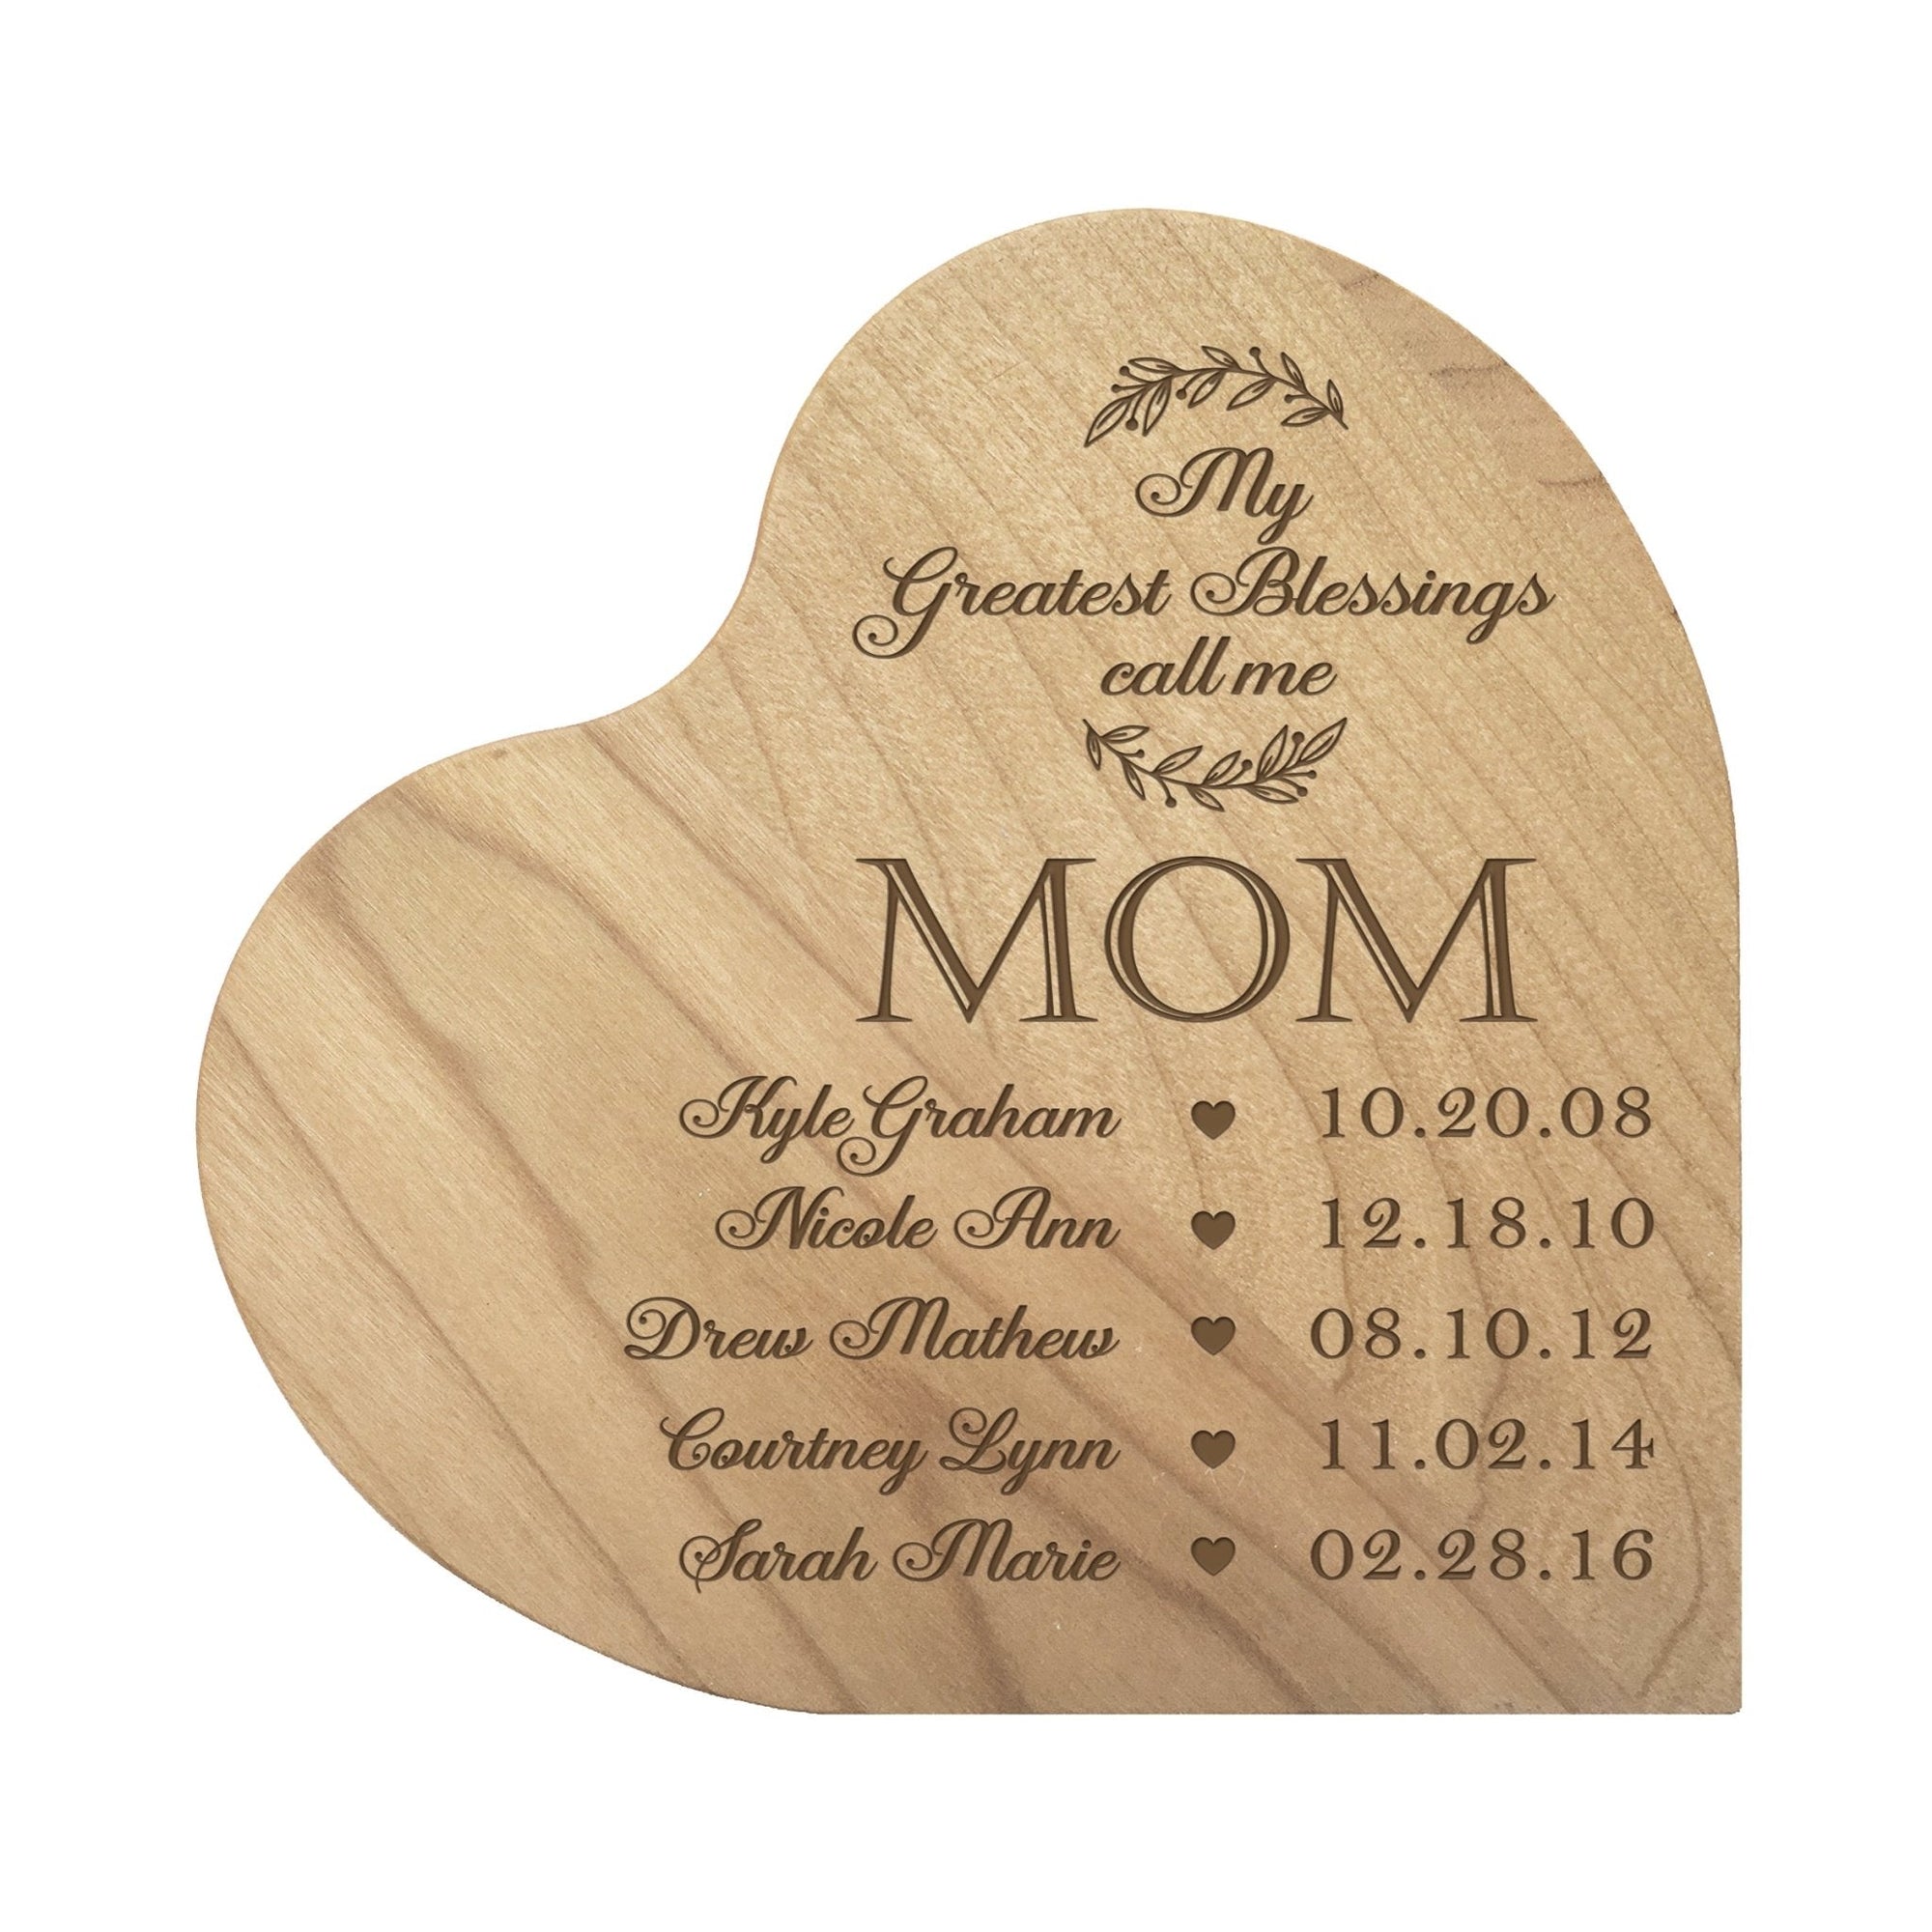 Personalized Modern Mother’s Love Solid Wood Heart Decoration With Inspirational Verse Keepsake Gift 5x5.25 - My Greatest Blessings Mom - LifeSong Milestones